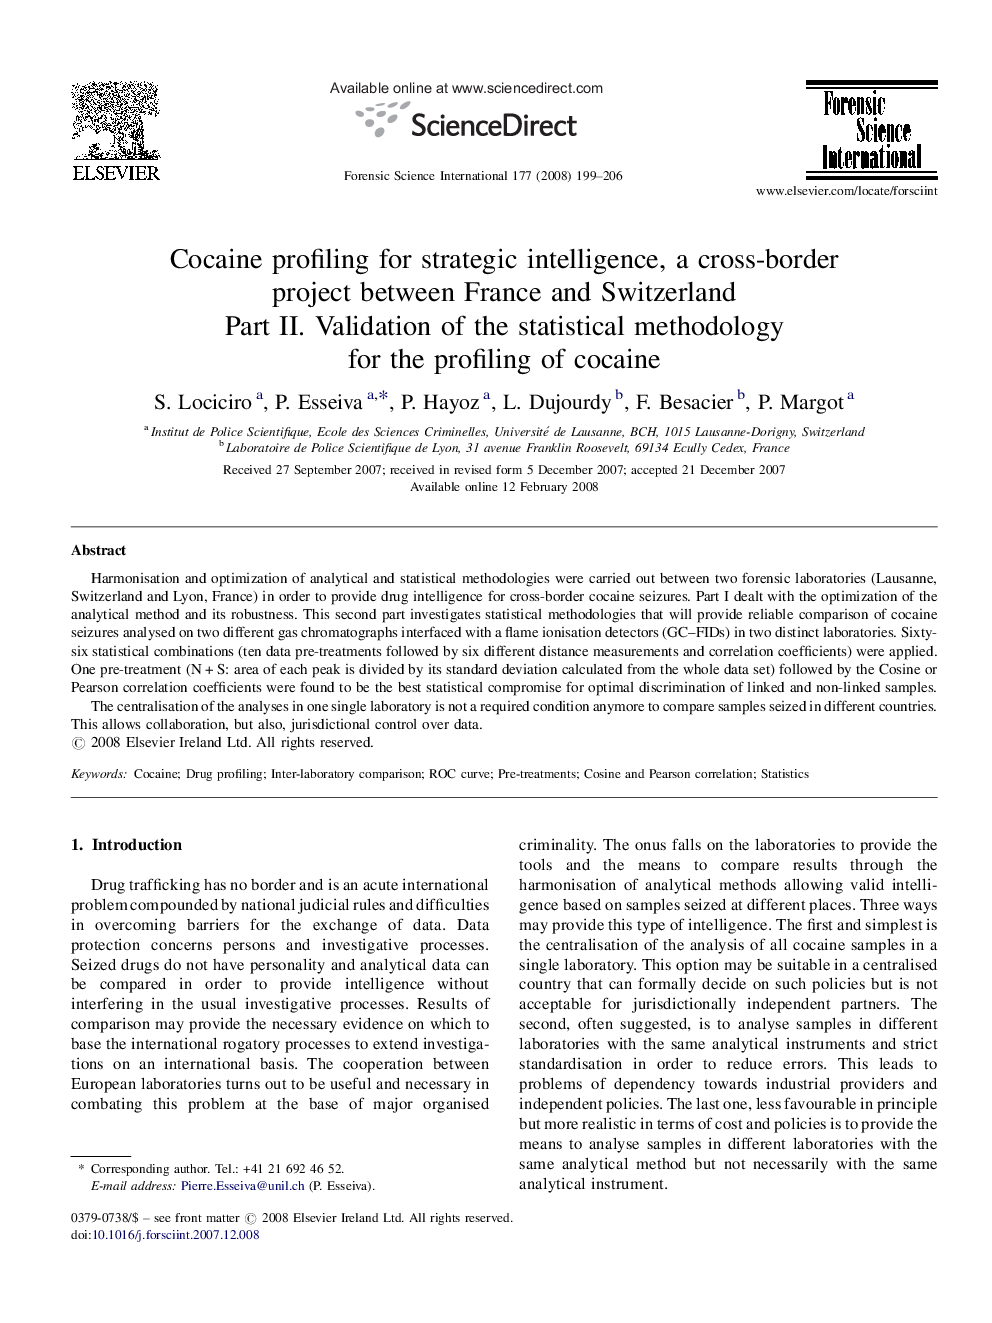 Cocaine profiling for strategic intelligence, a cross-border project between France and Switzerland: Part II. Validation of the statistical methodology for the profiling of cocaine